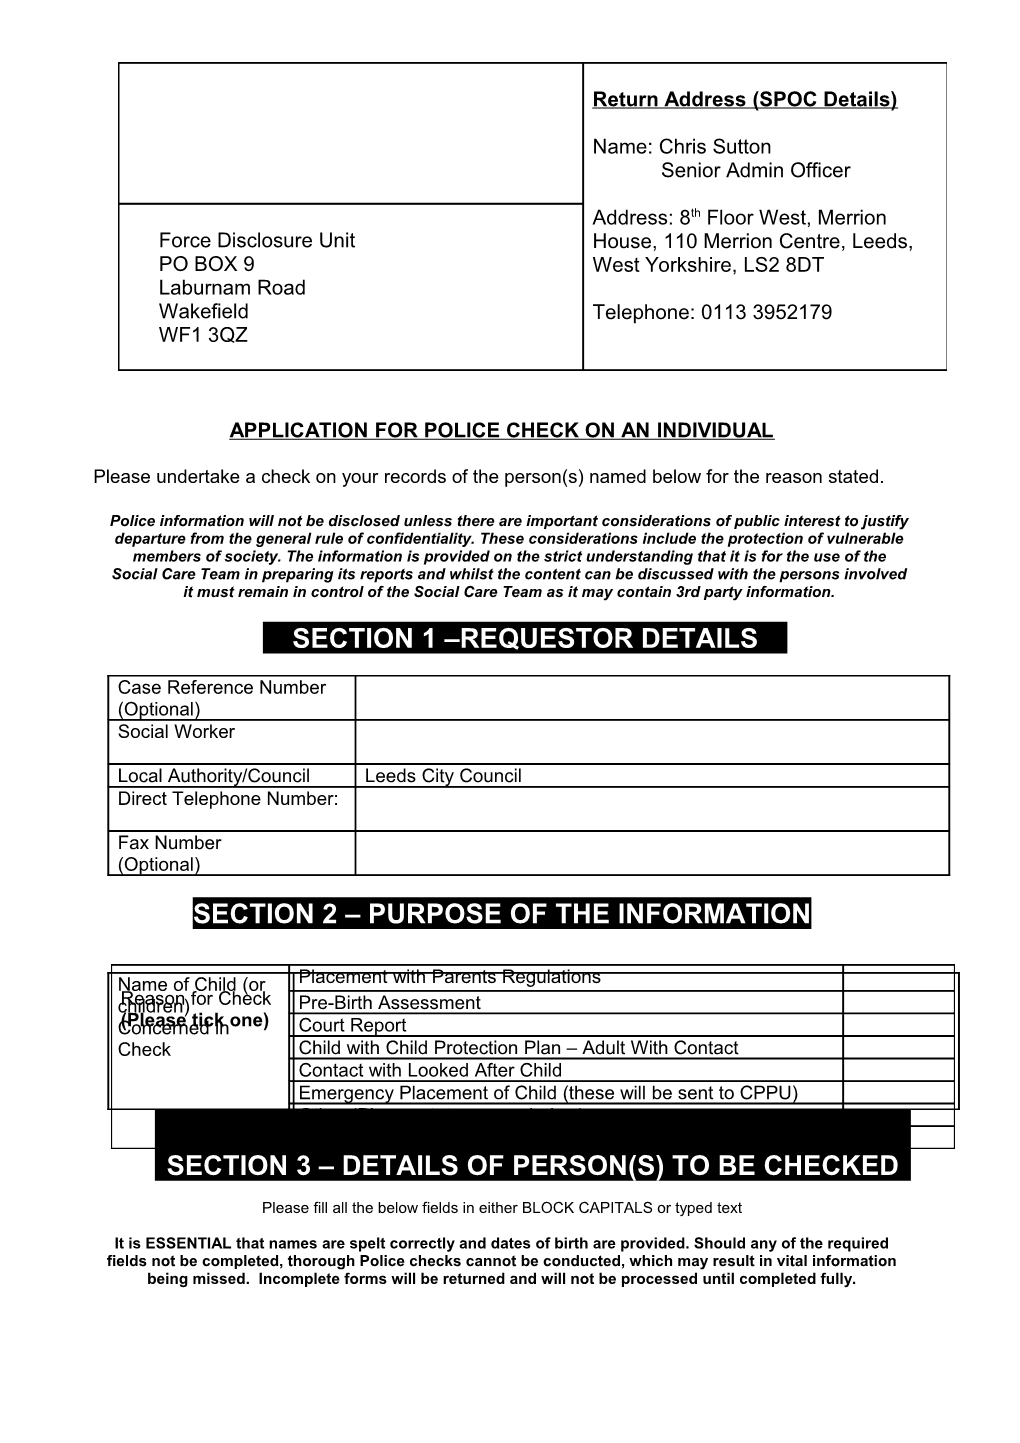 Application for Police Check on an Individual